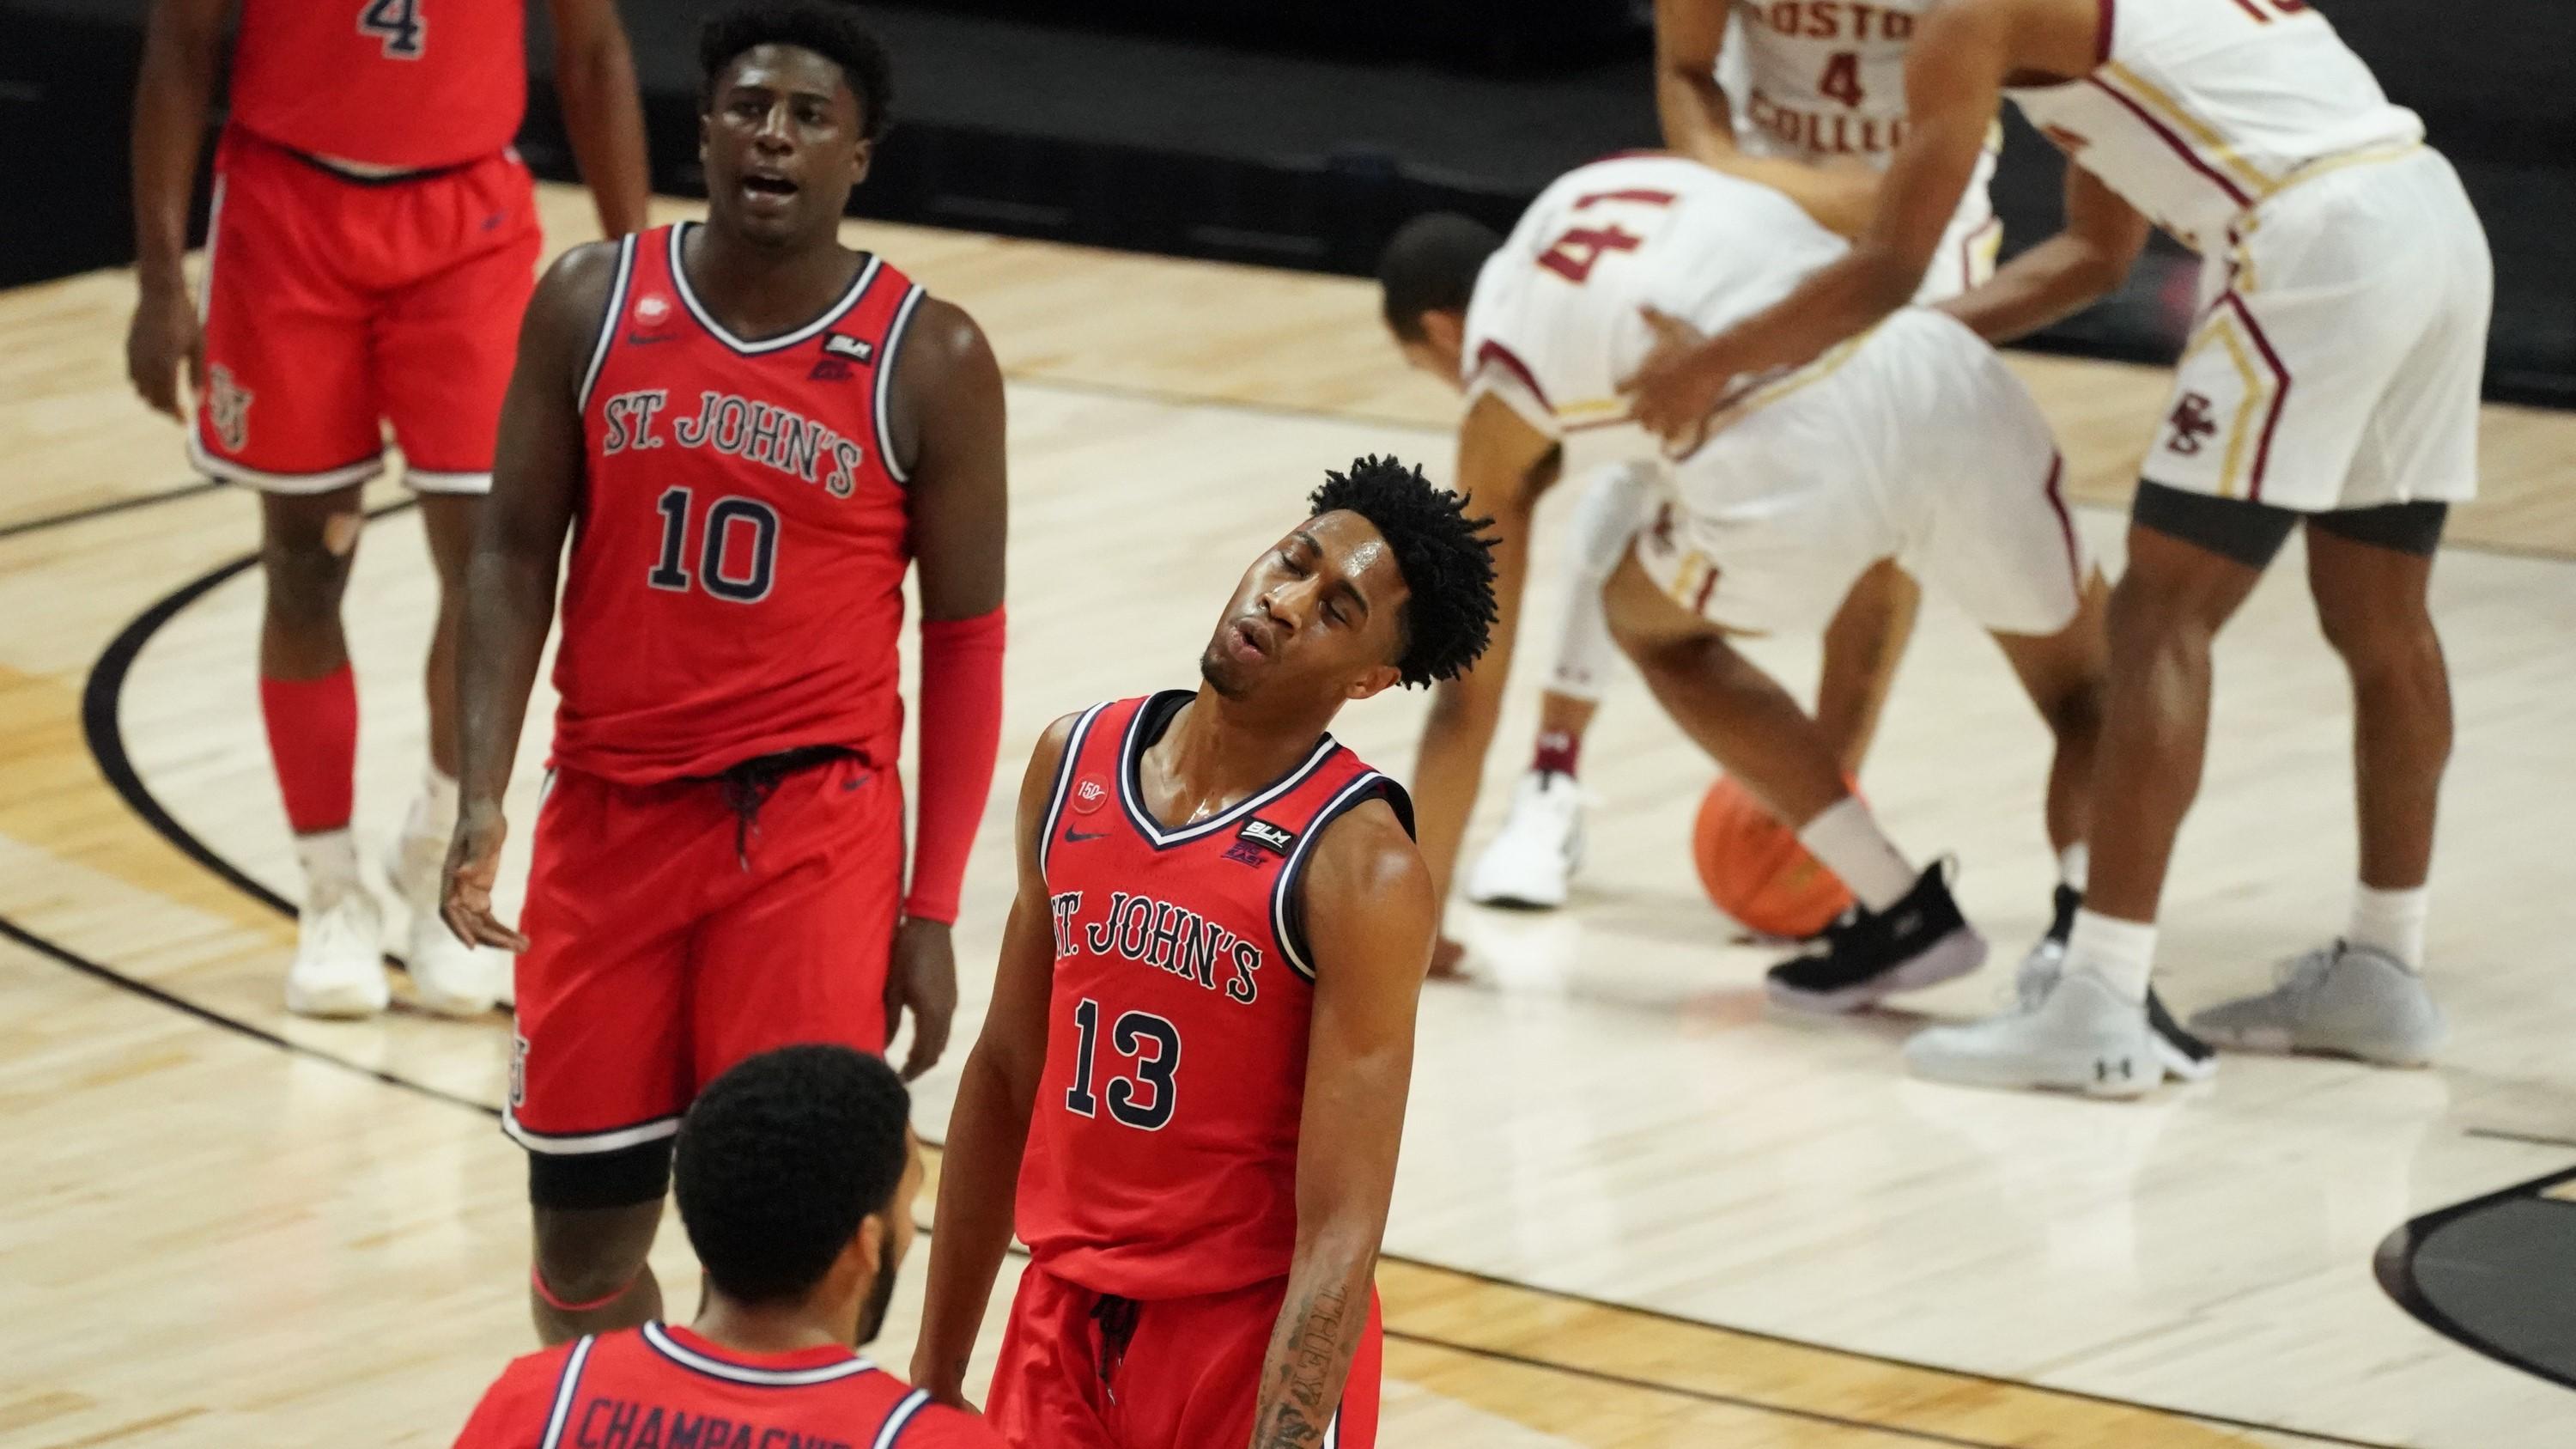 St. John's Red Storm forward Isaih Moore (13) reacts after a play against the Boston College Eagles in the first half at Mohegan Sun Arena. / David Butler II